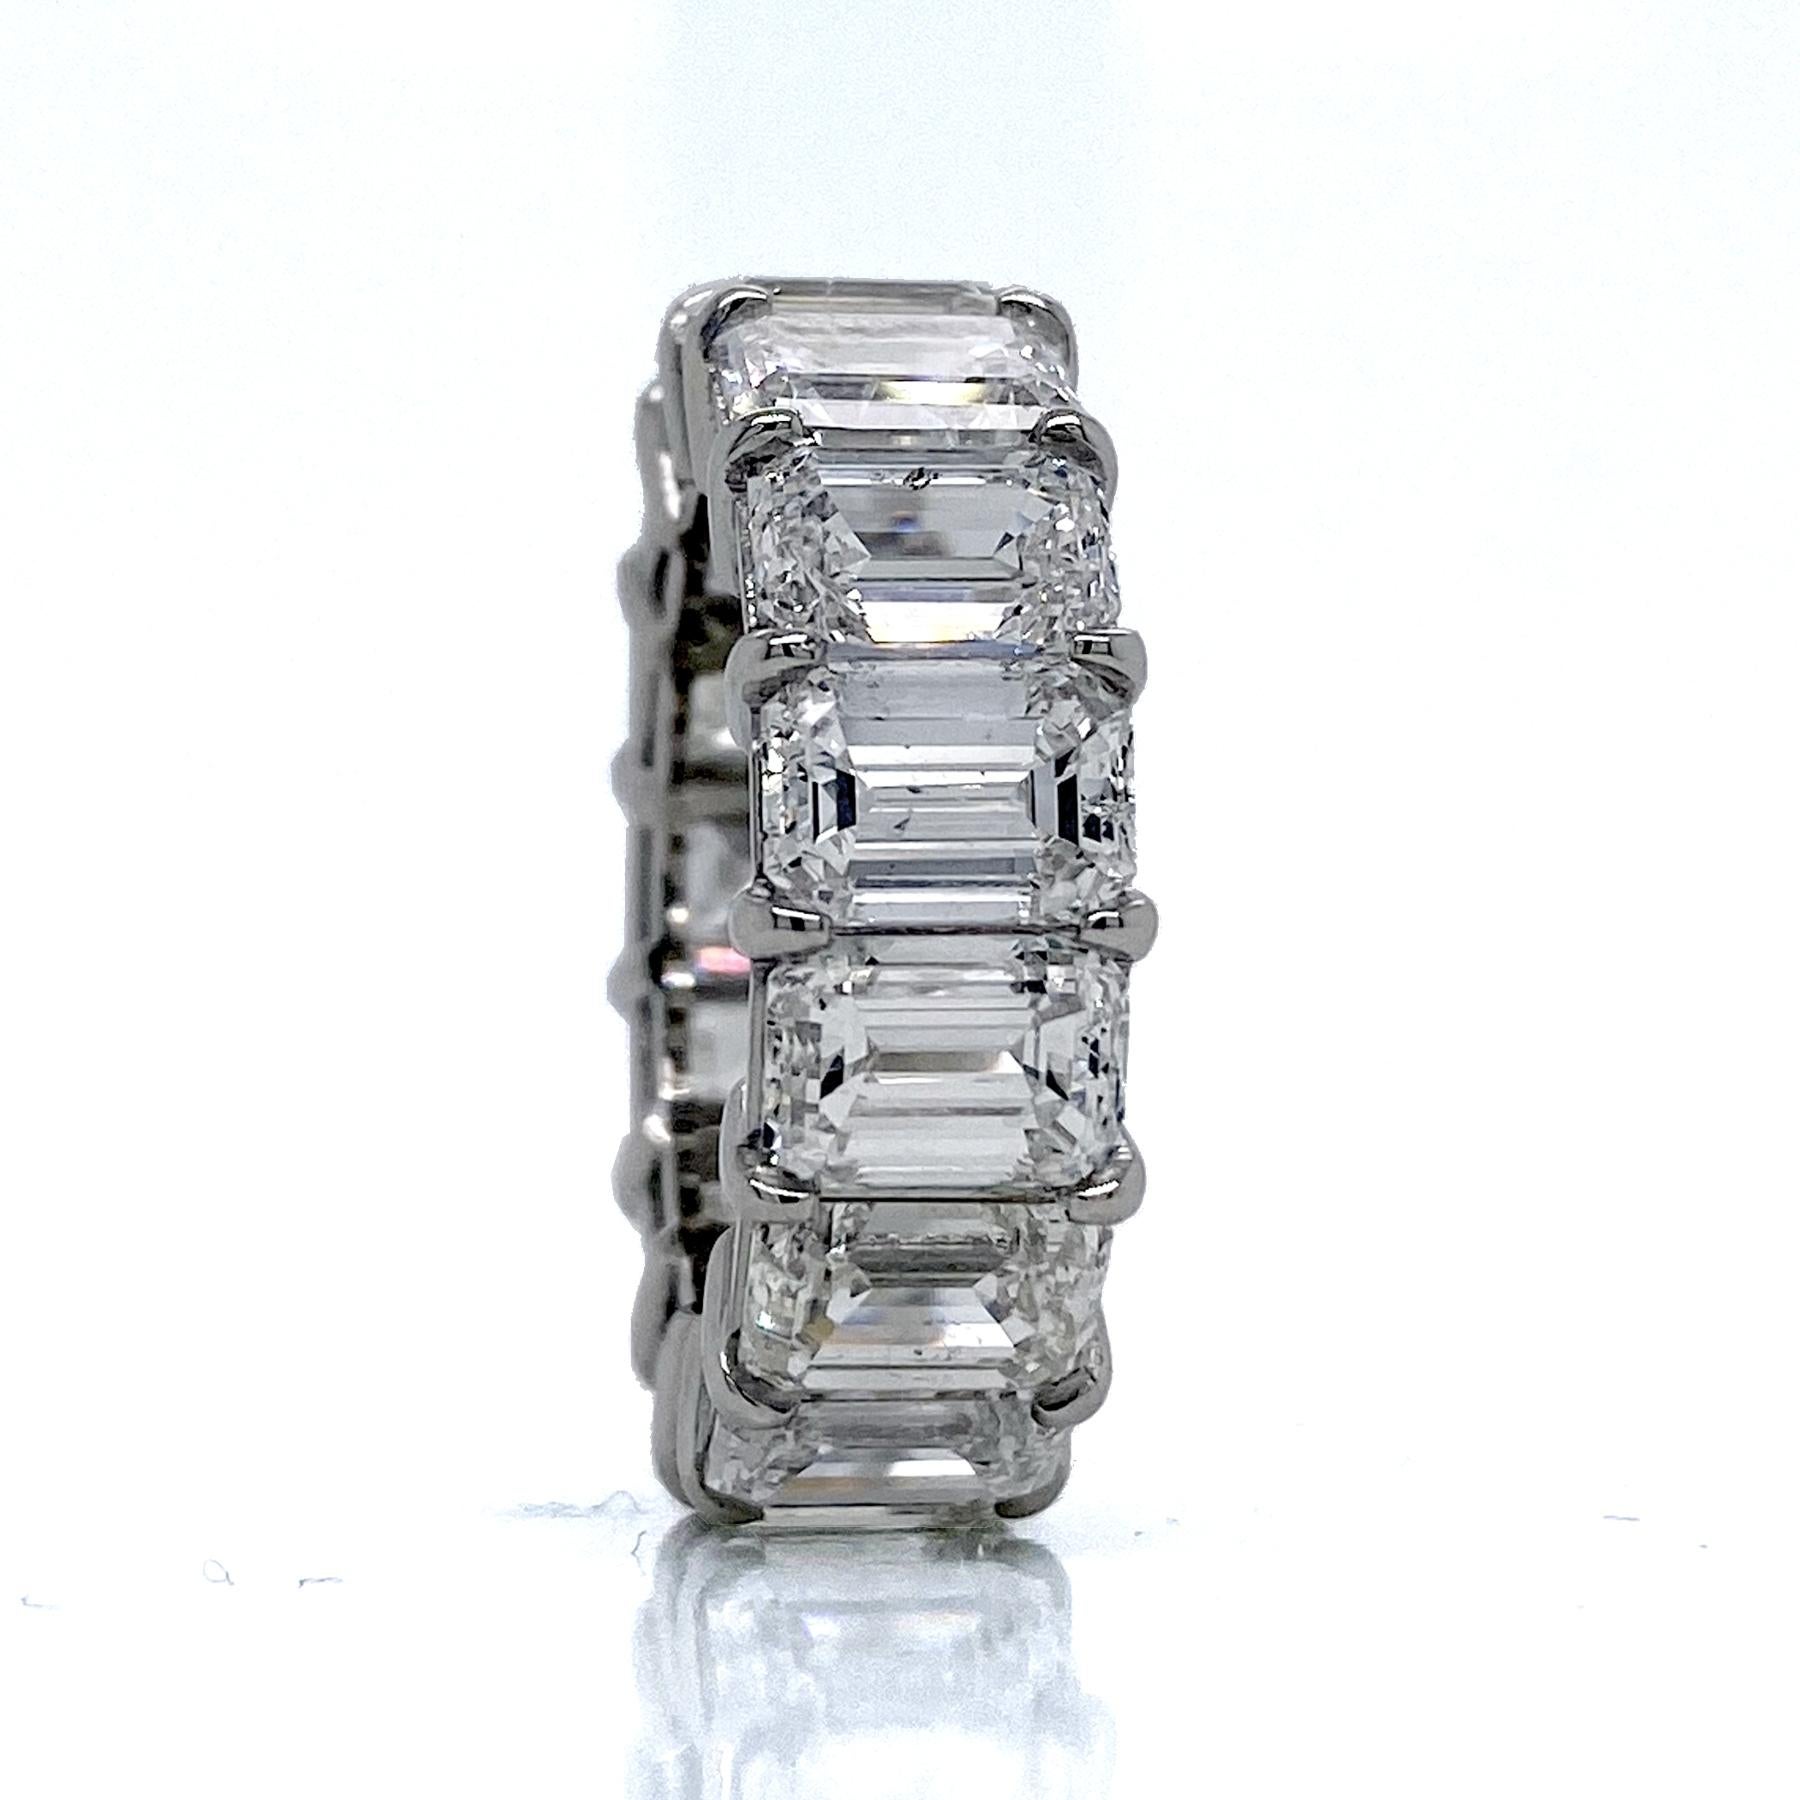 This beautiful Eternity Ring is made of platinum with 15 perfectly matched (SI1-SI2/D-F) 1.00+ Ct  Emerald cut Diamonds.
Total Weight of diamonds: 15.51 Ct 
Total Weight of the Ring: 9.20 Gr Platinum
Ring Size: 6.25